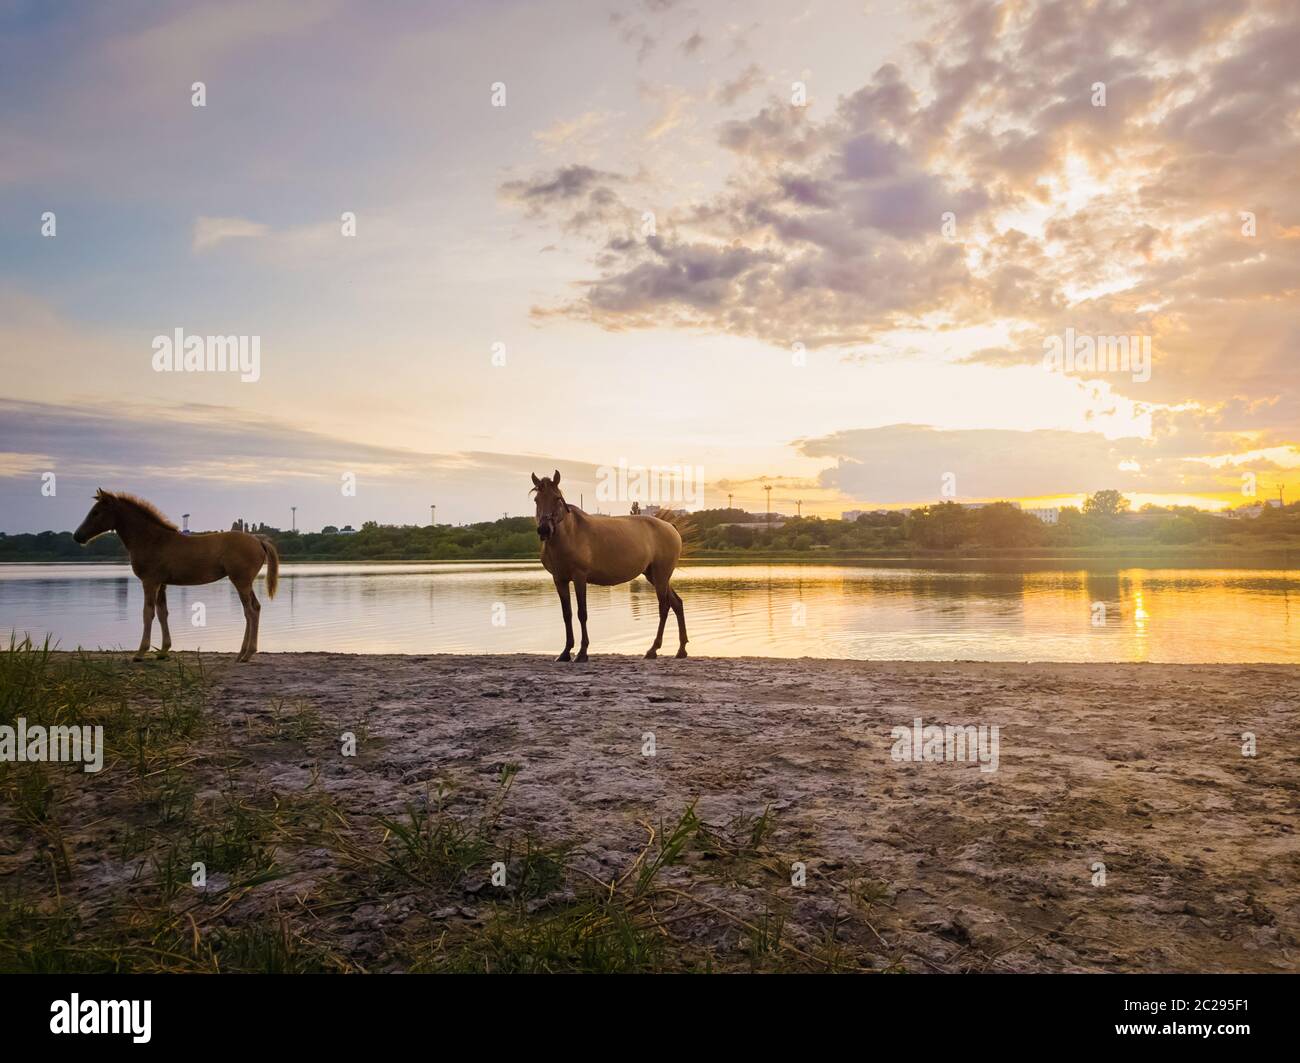 Two brown horses, young foal and his mother mare, standing near pond, watering over sunset background with reflection on the lake surface. Stock Photo